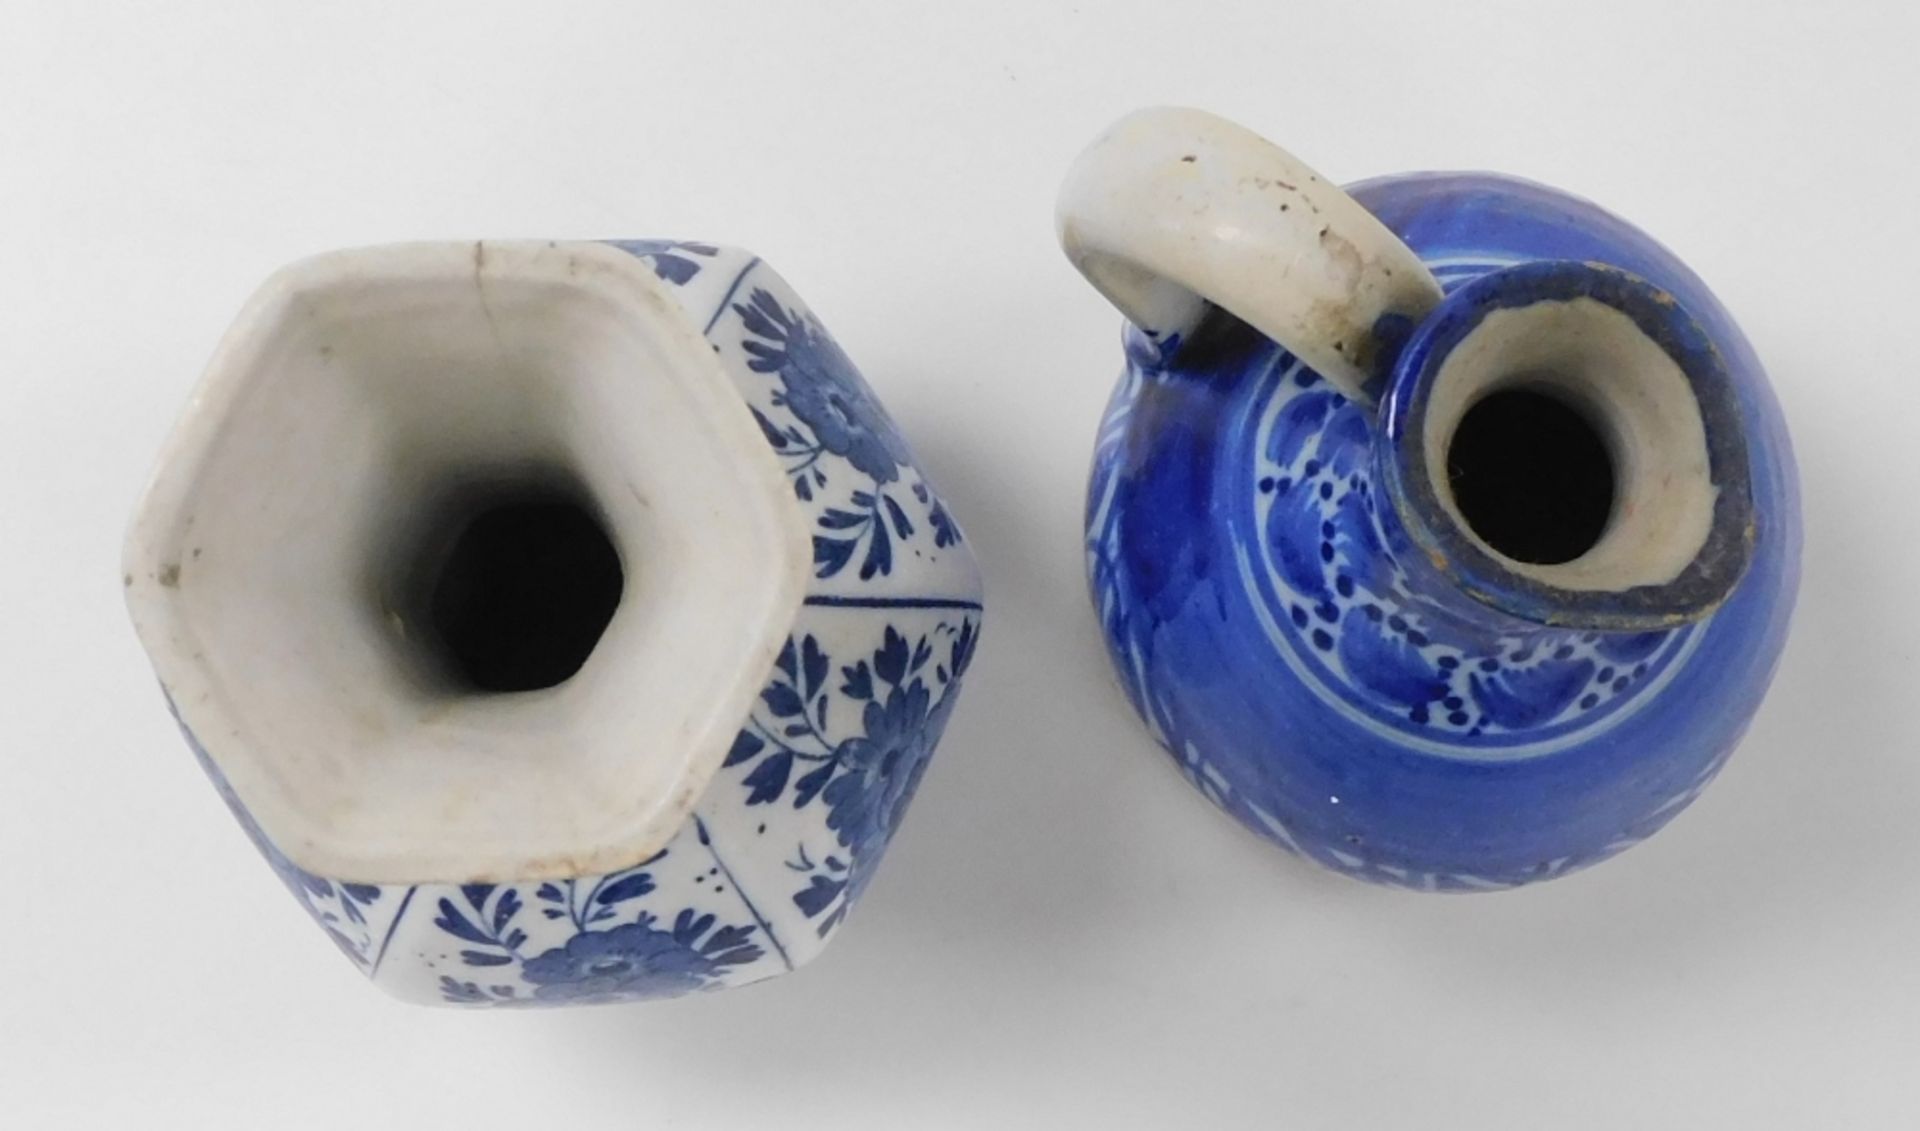 A pair of Qing Dynasty blue and white cylindrical porcelain vases, decorated with flowers, 24cm high - Image 8 of 11